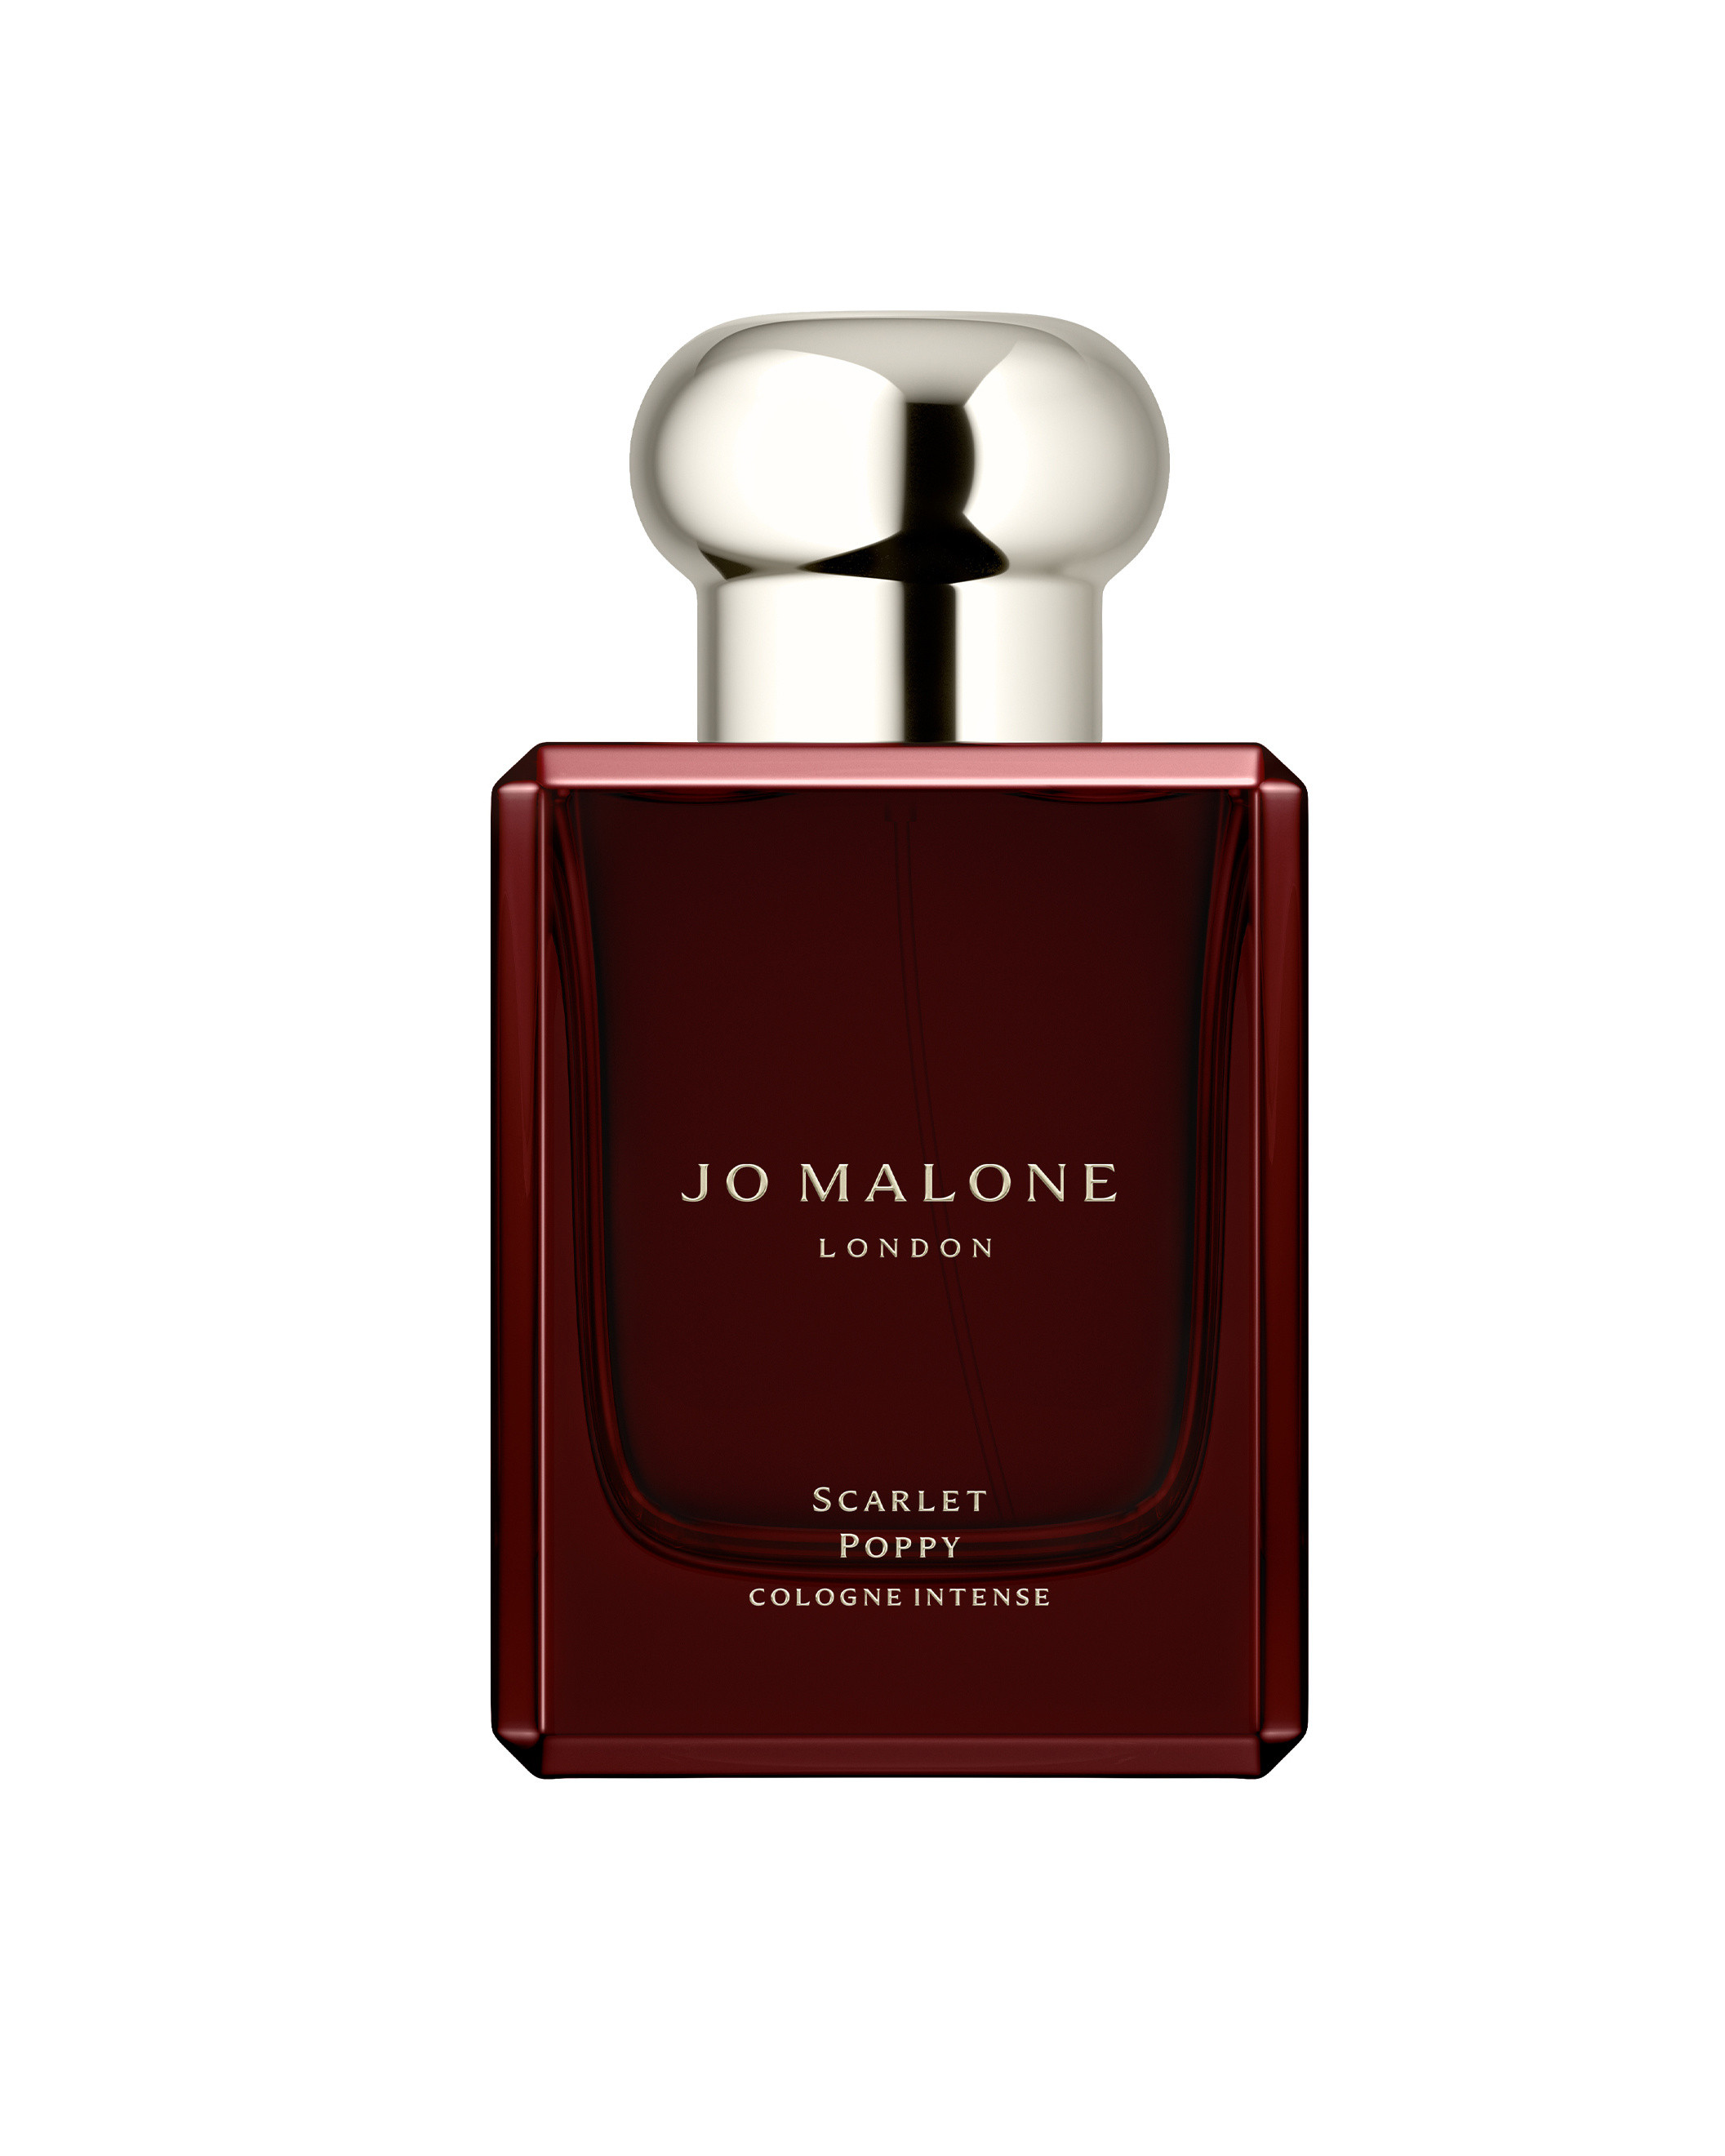 Jo Malone Scarlet Poppy Cologne Intense 50 ml, Red, large image number 0